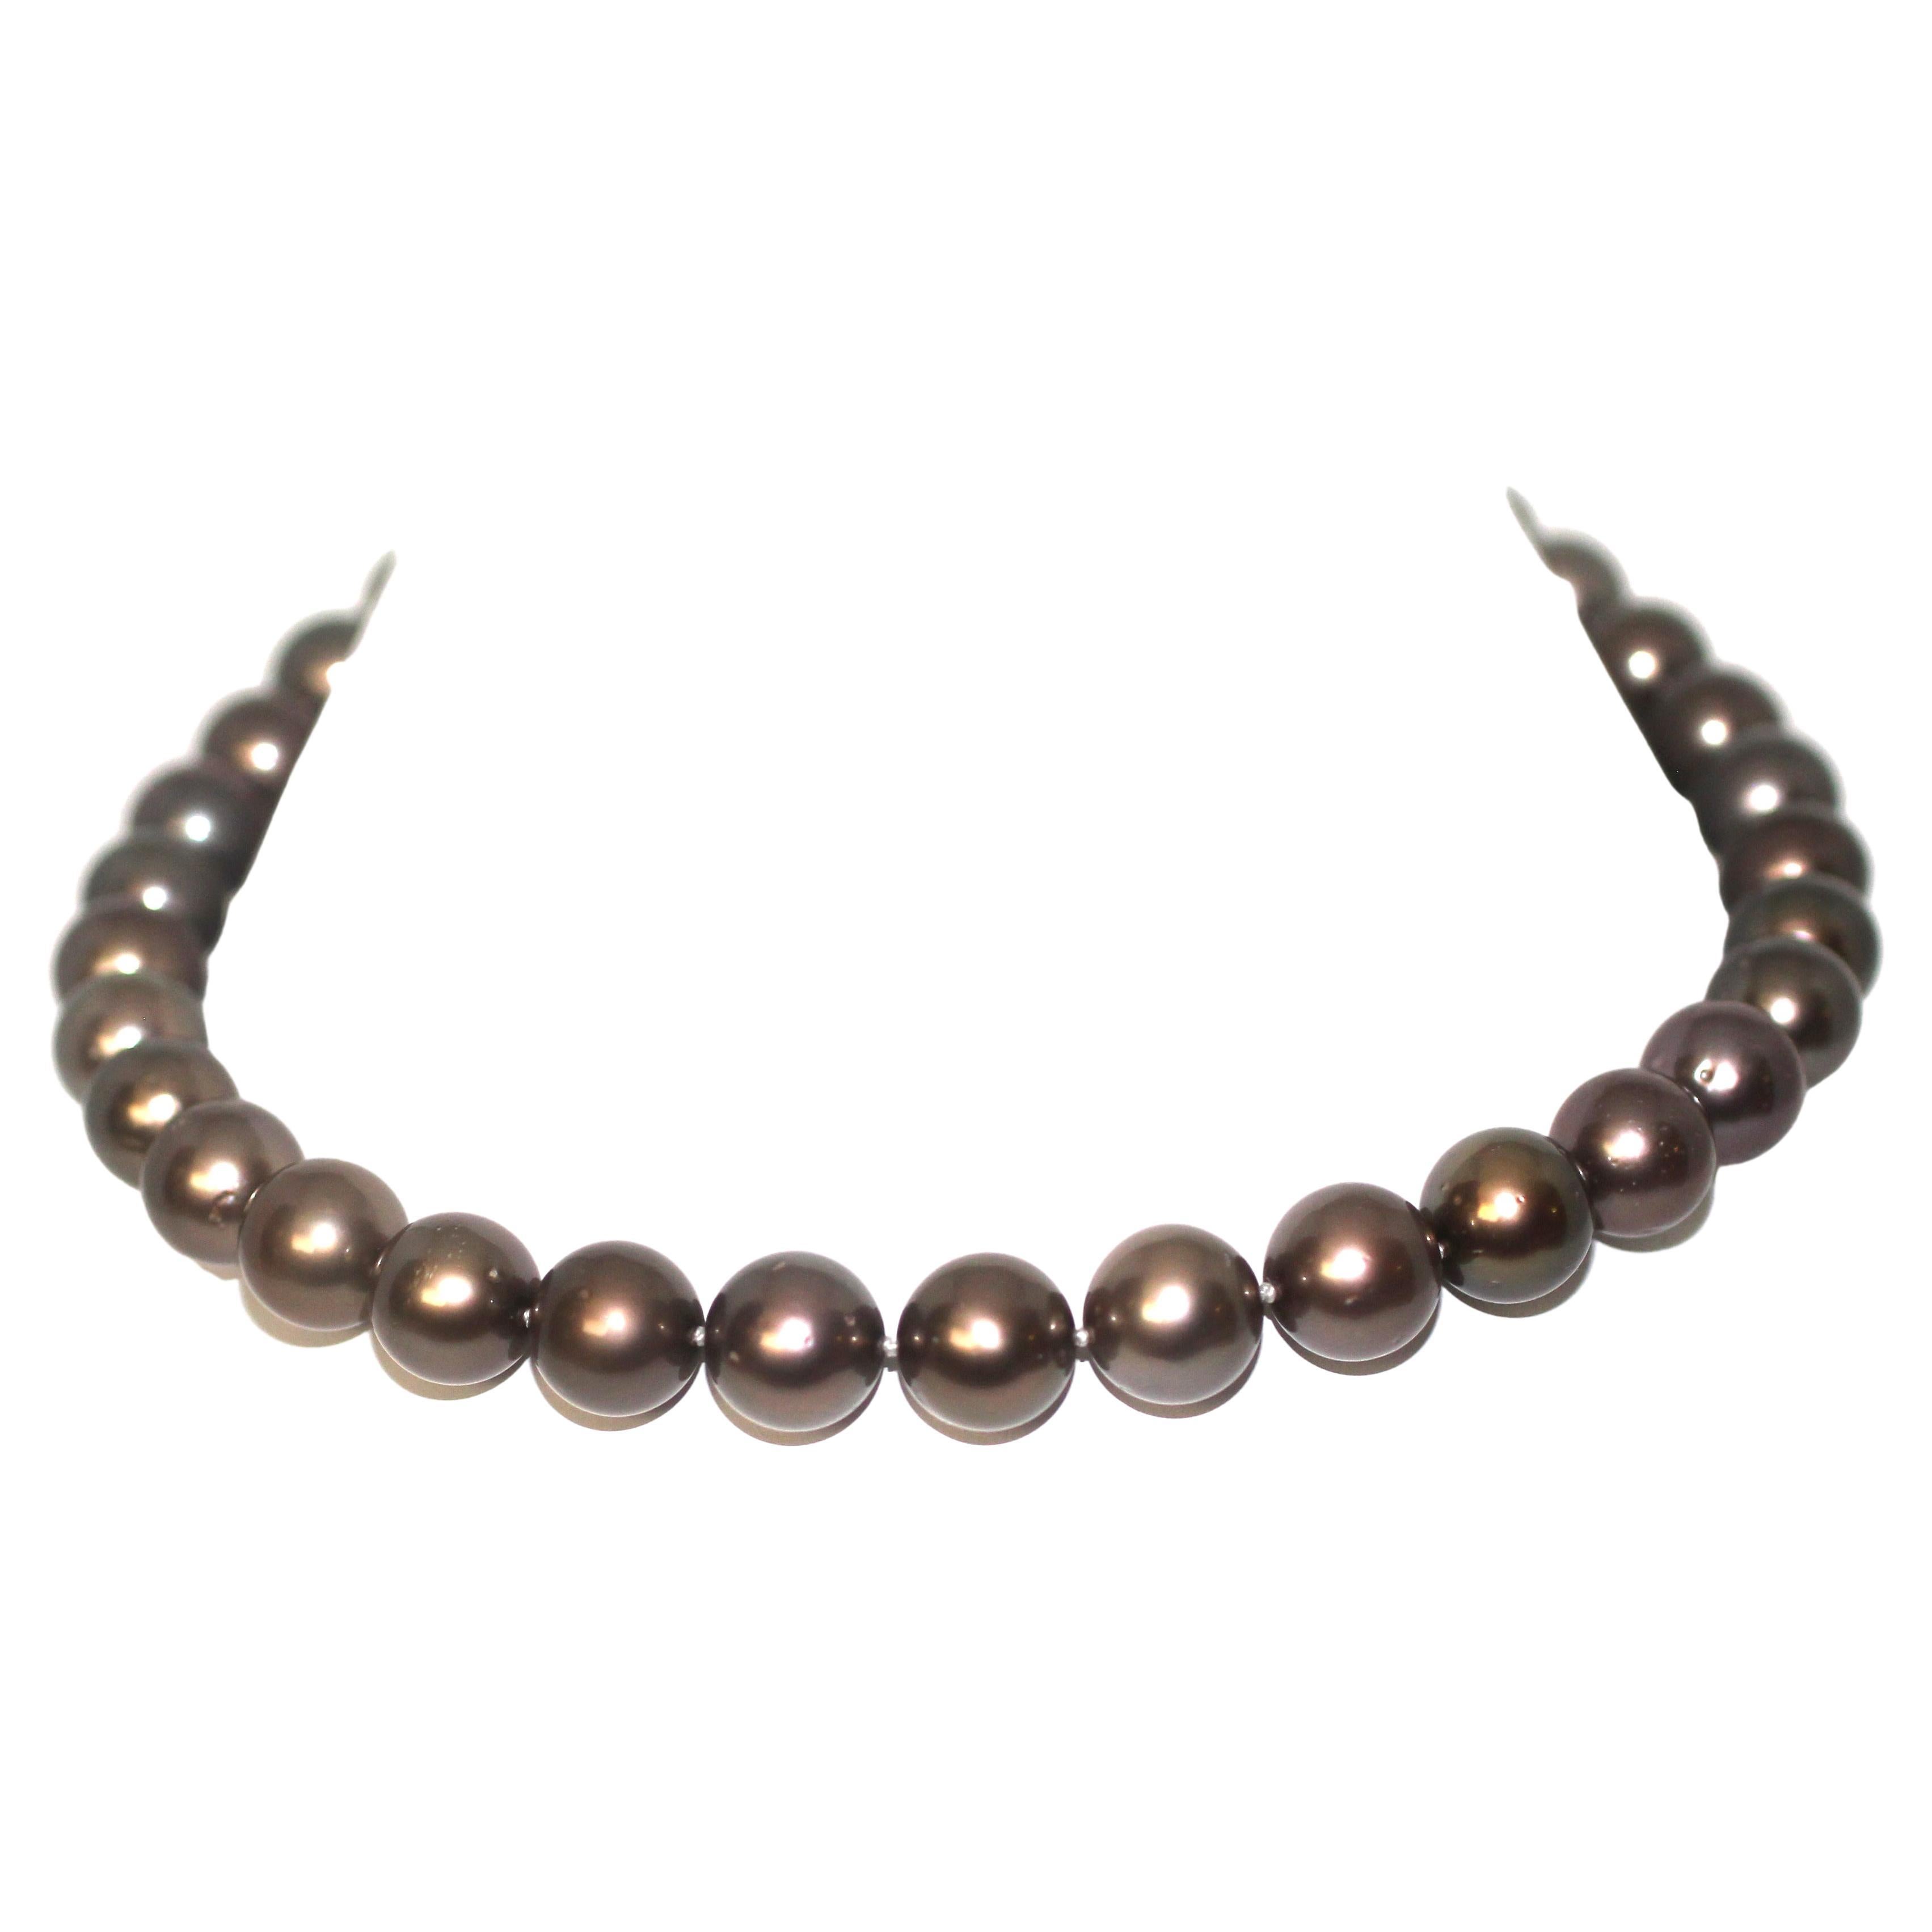 Hakimoto 11X12mTahitian South Sea Natural Brown Pearl Necklace 18K Diamond Clasp For Sale